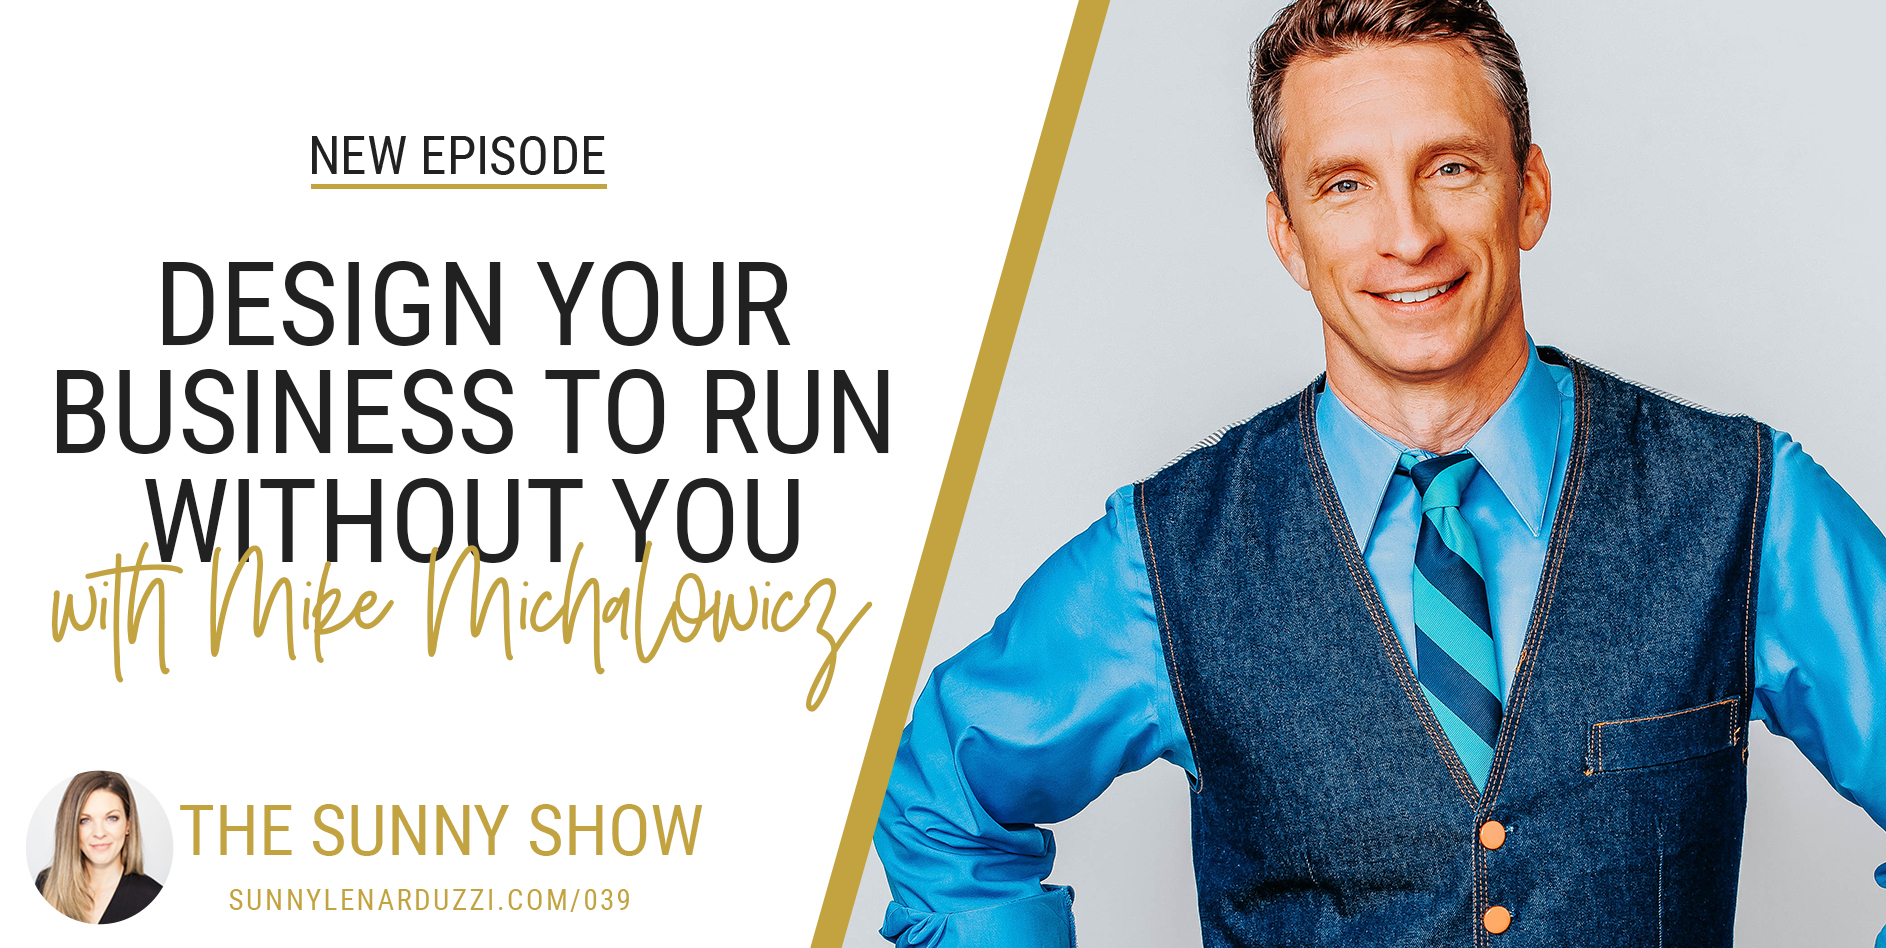 Design Your Business to Run Without You with Mike Michalowicz 